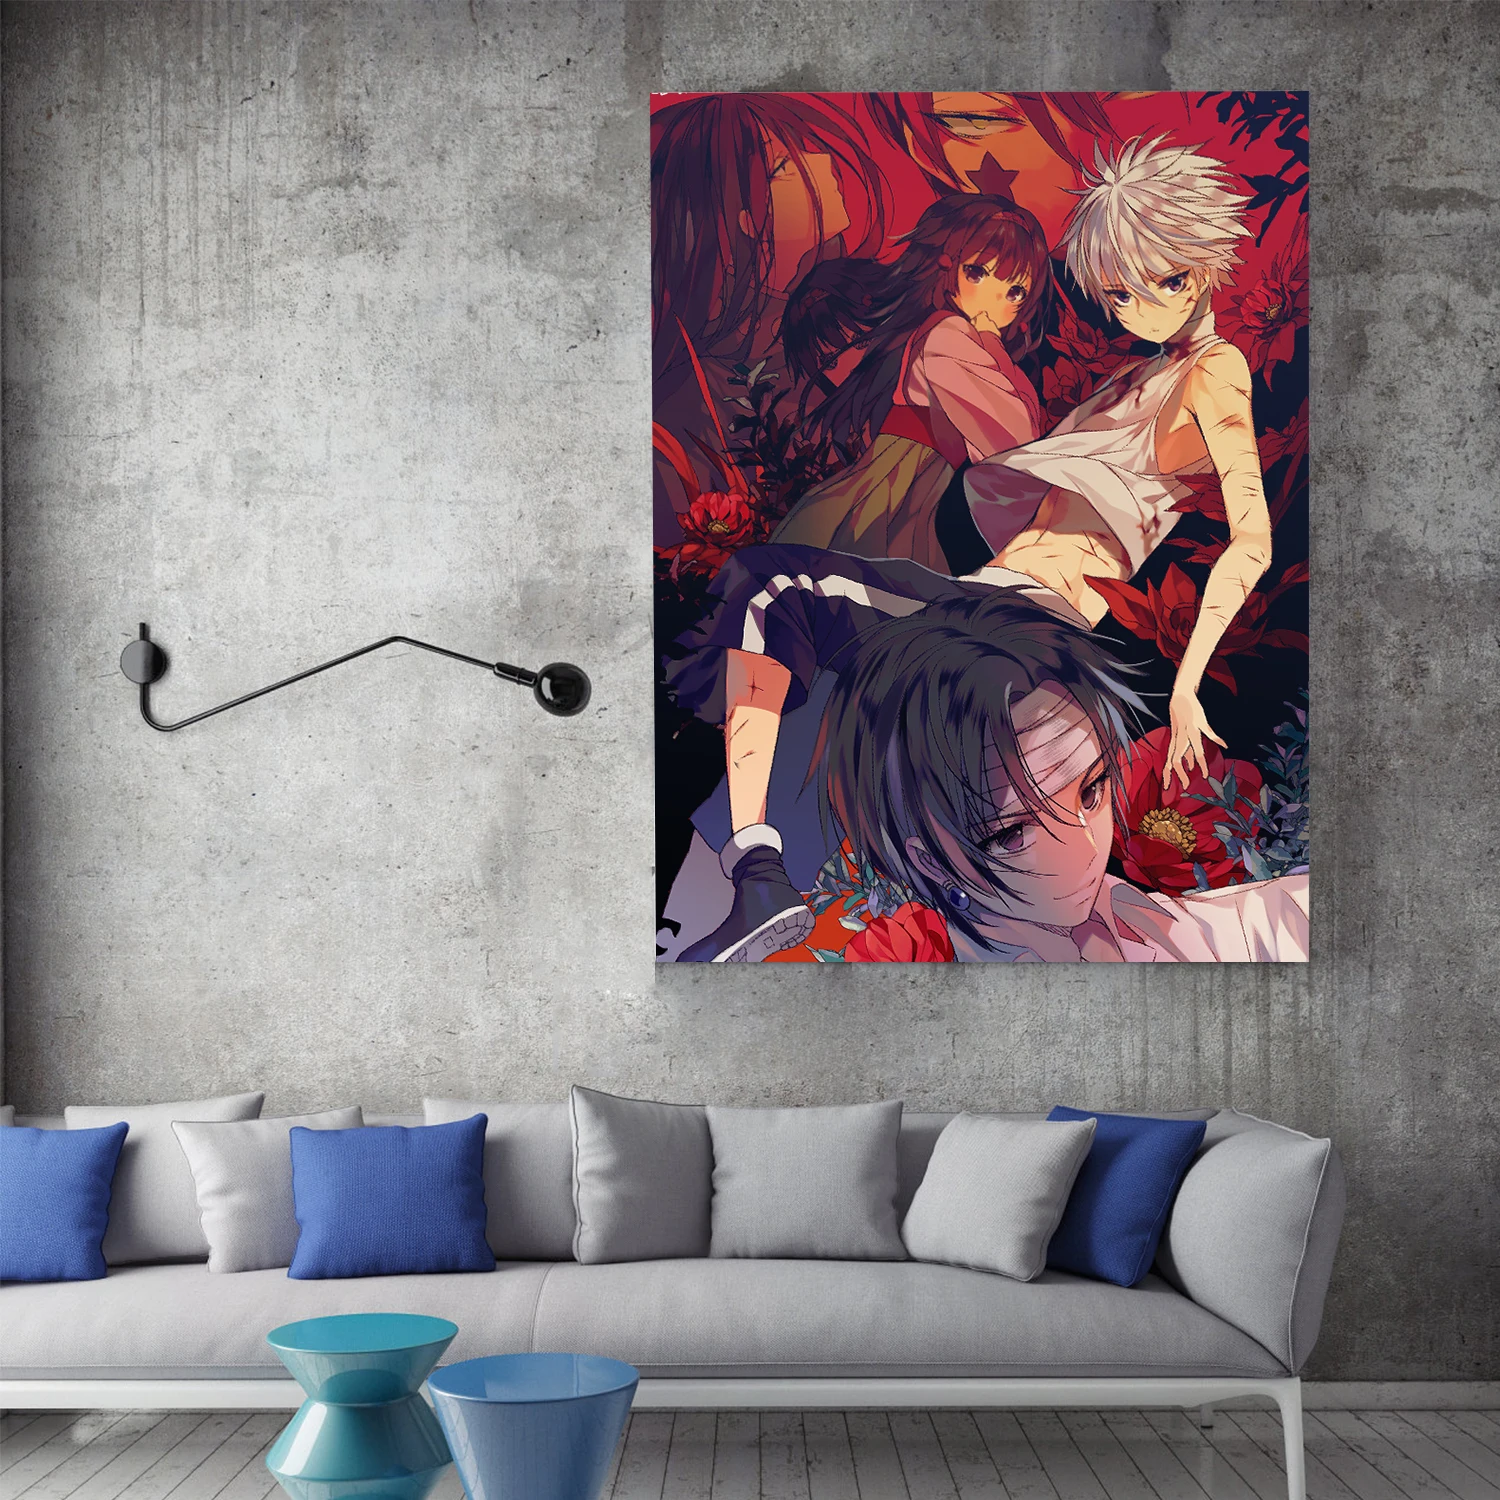 Hunter x Hunter Anime Home Decor Canvas Painting Wall Art Posters And Prints Pictures Modular Modern For Living Room Decoration